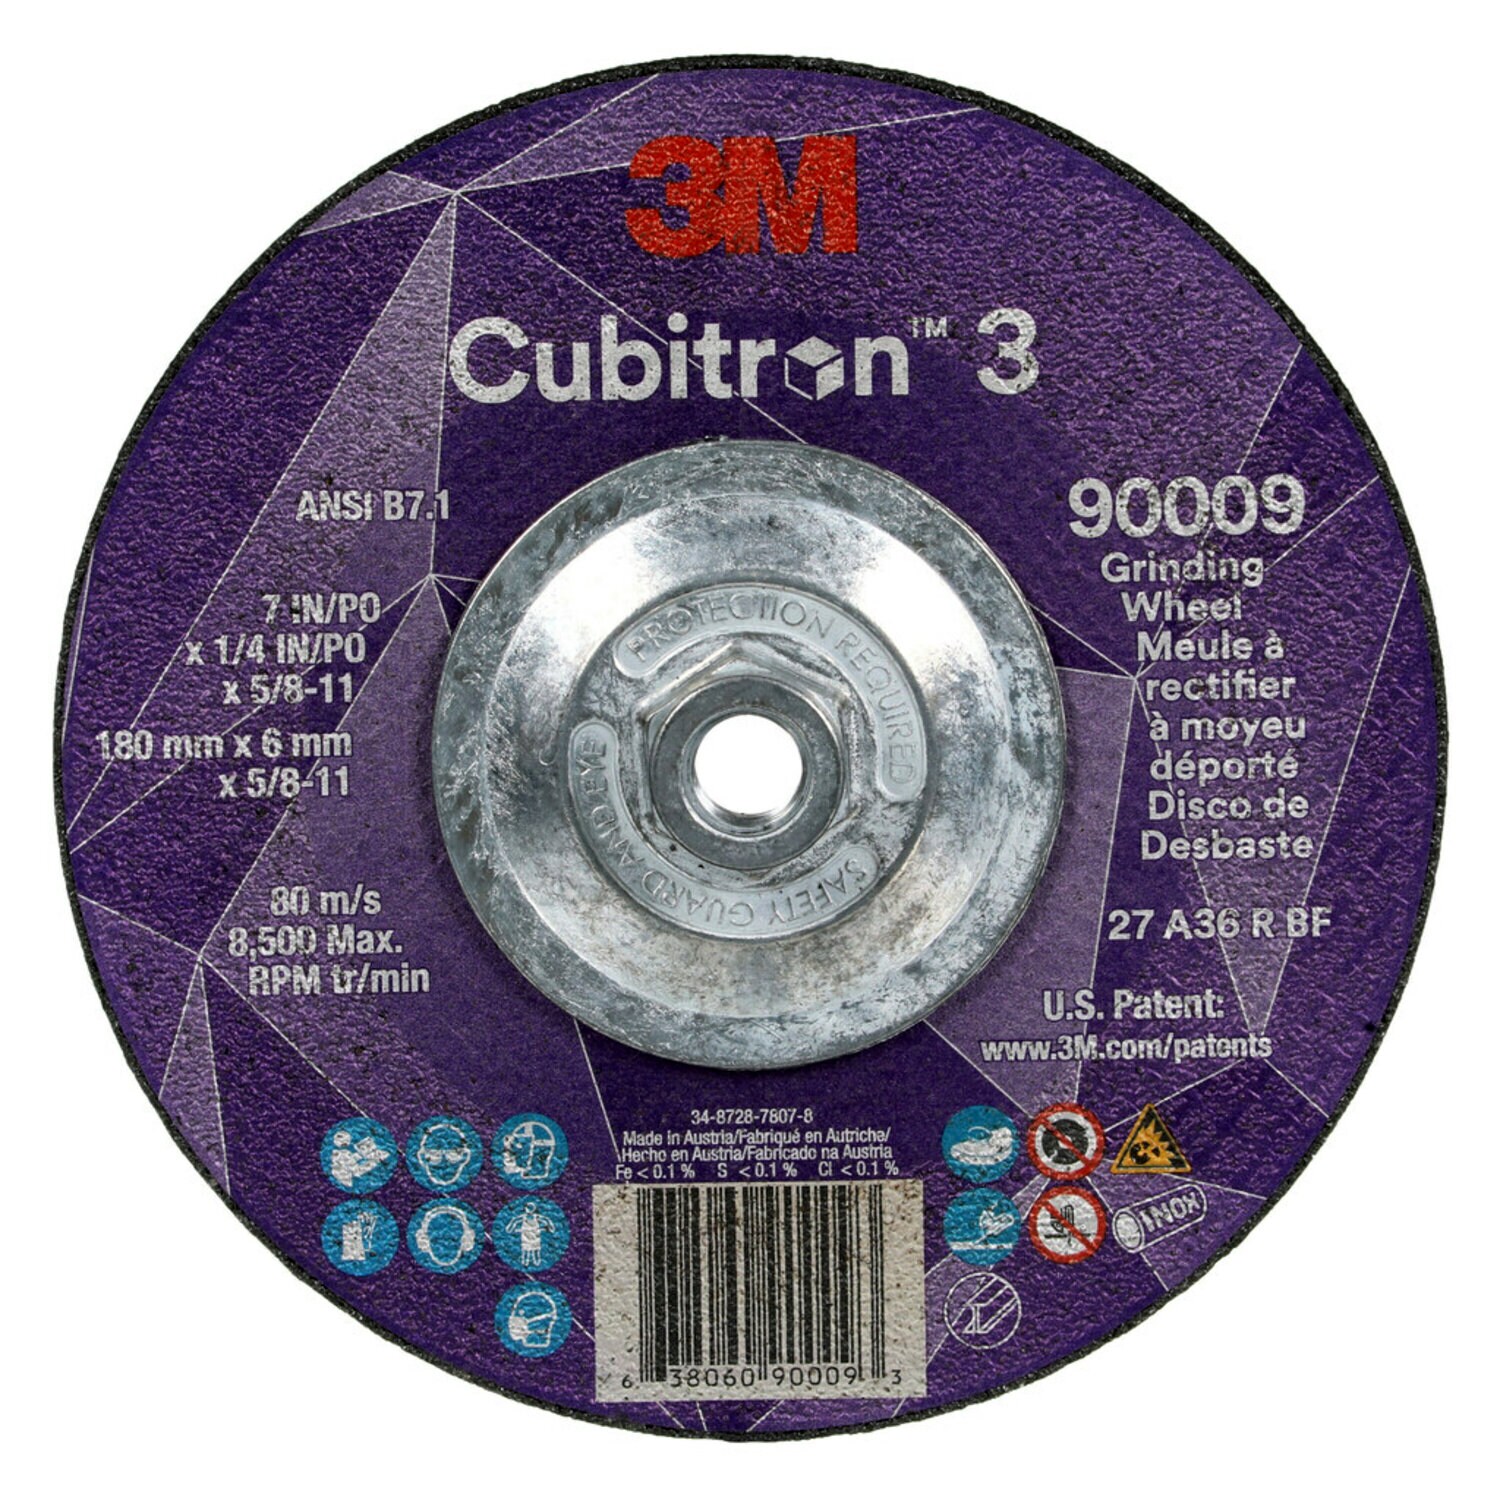 7100312965 - 3M Cubitron 3 Depressed Center Grinding Wheel, 90009, 36+, T27, 7 in x
1/4 in x 5/8 in-11 (180x6mmx5/8-11in), ANSI, 10 ea/Case